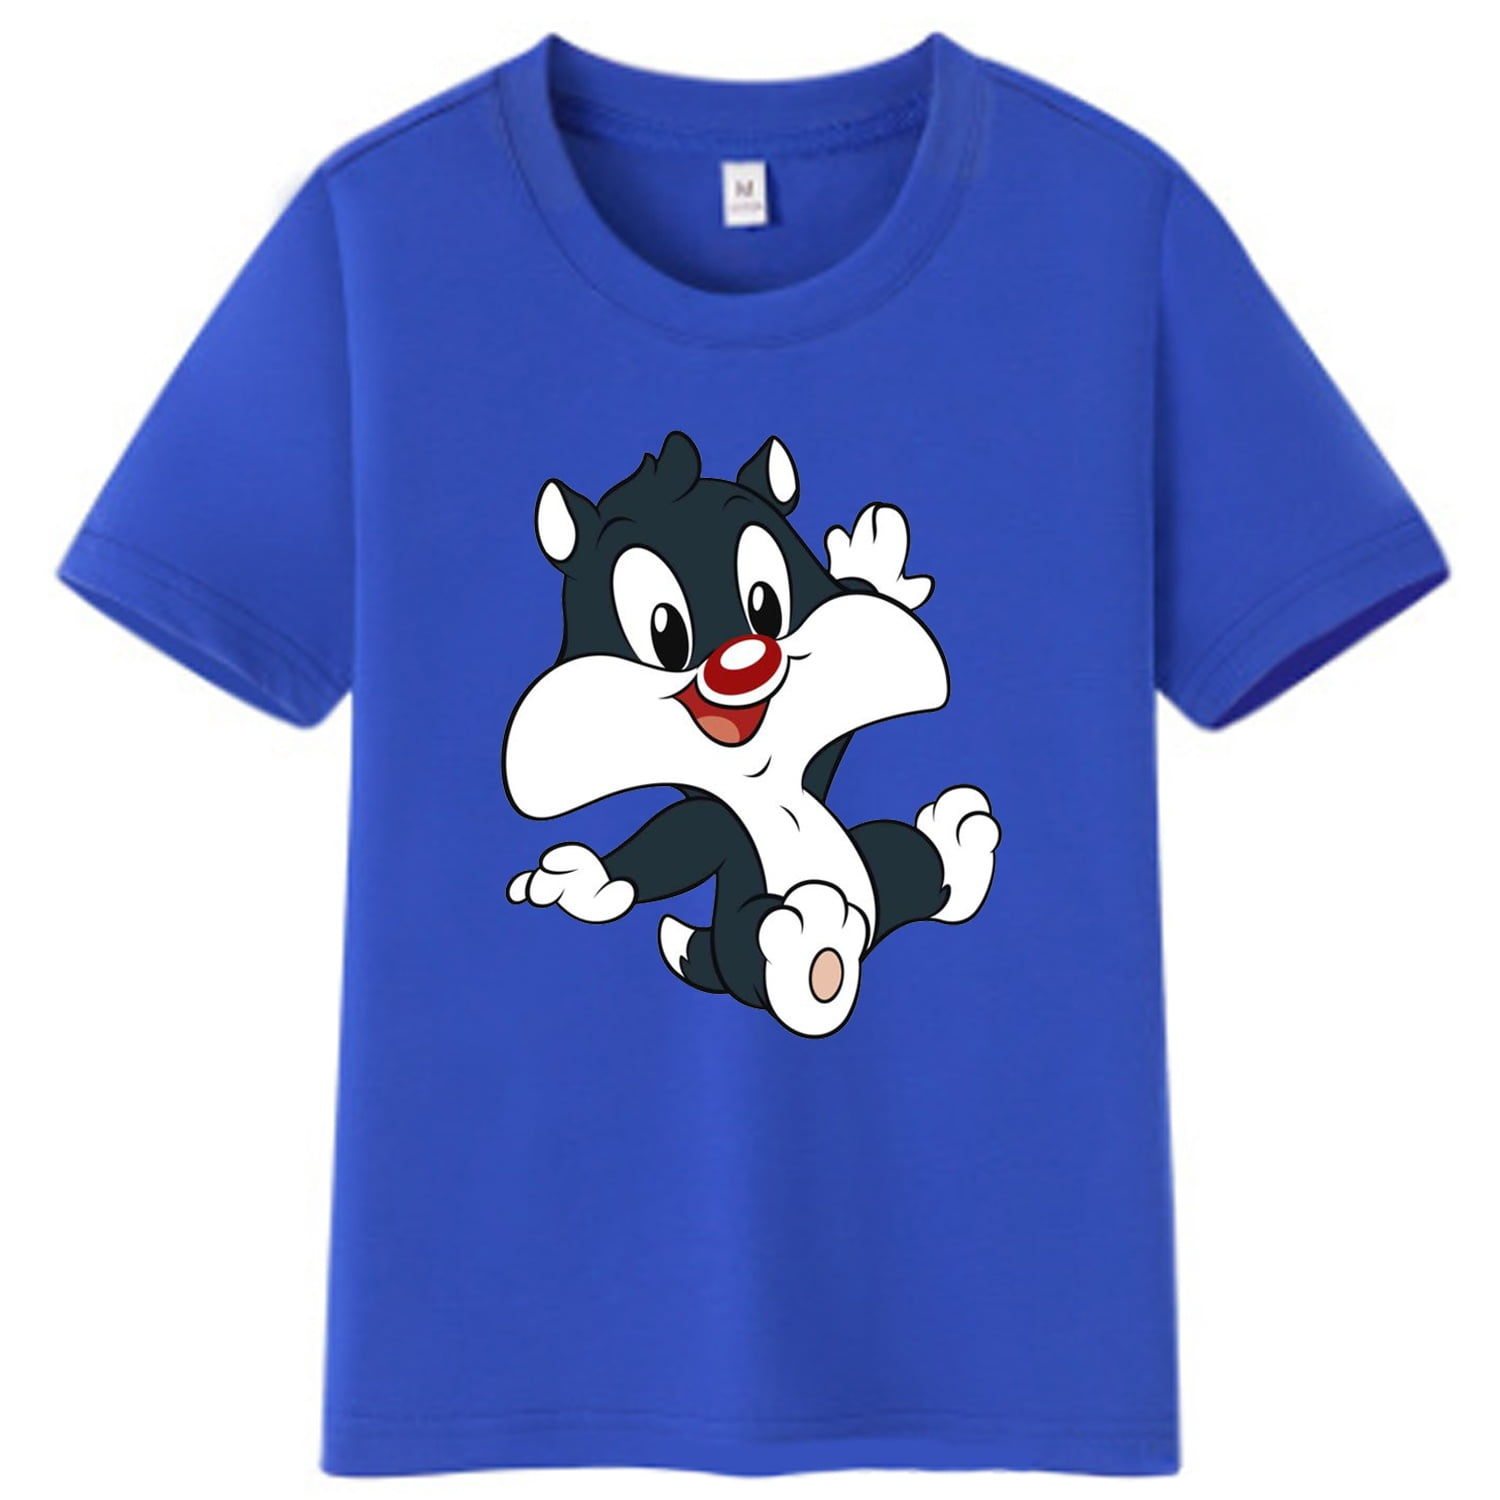 Casual Tunes Cotton Tops Baby Short Boys Kids T-Shirts Tees Looney Sleeve Neck Cat Cartoon Girls Girls for Relaxed Scoop Gift Sylvester